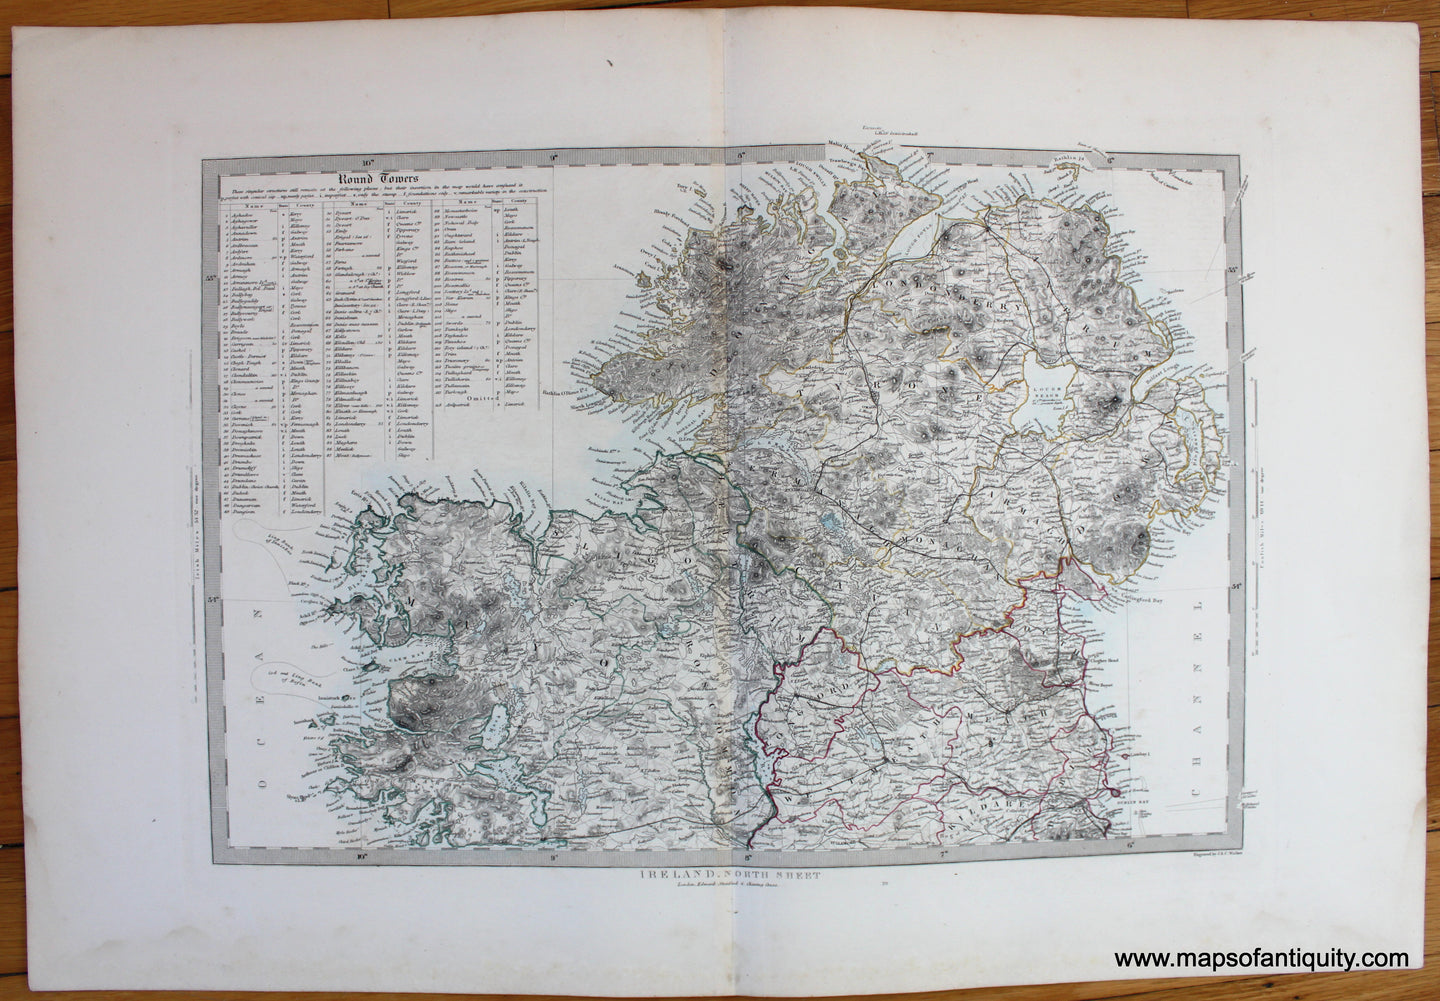 Antique-Map-Ireland-North-Sheet-SDUK-Society-for-the-Diffusion-of-Useful-Knowledge-1840-1840s-1800s-Early-Mid-19th-Century-Maps-of-Antiquity